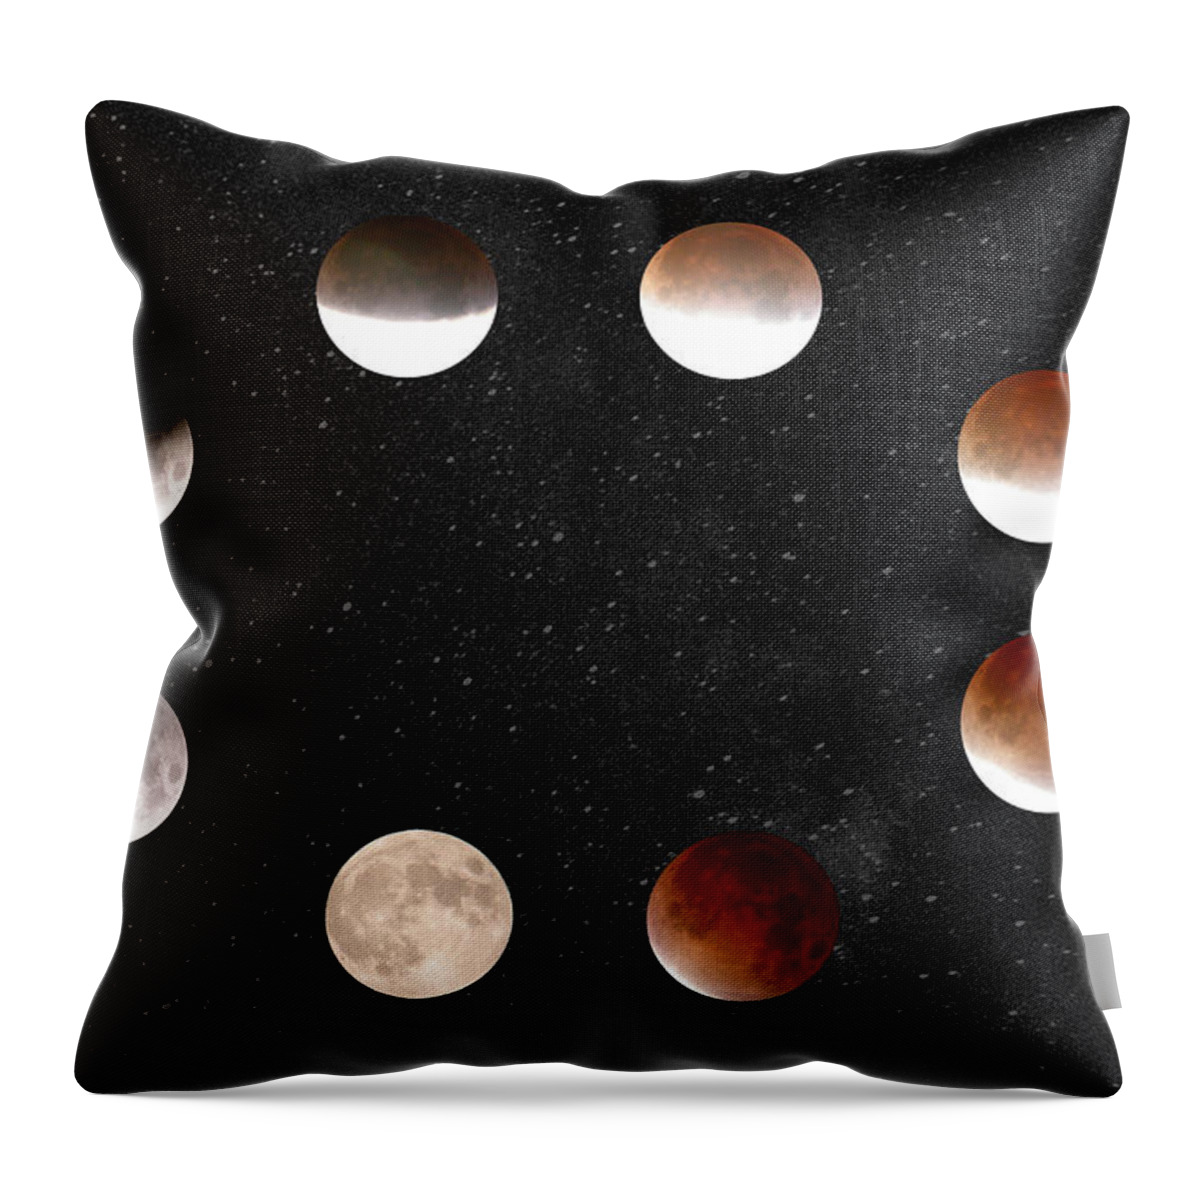 Outdoors Throw Pillow featuring the photograph Eclipse Of The Moon by Mike Meysner Photography